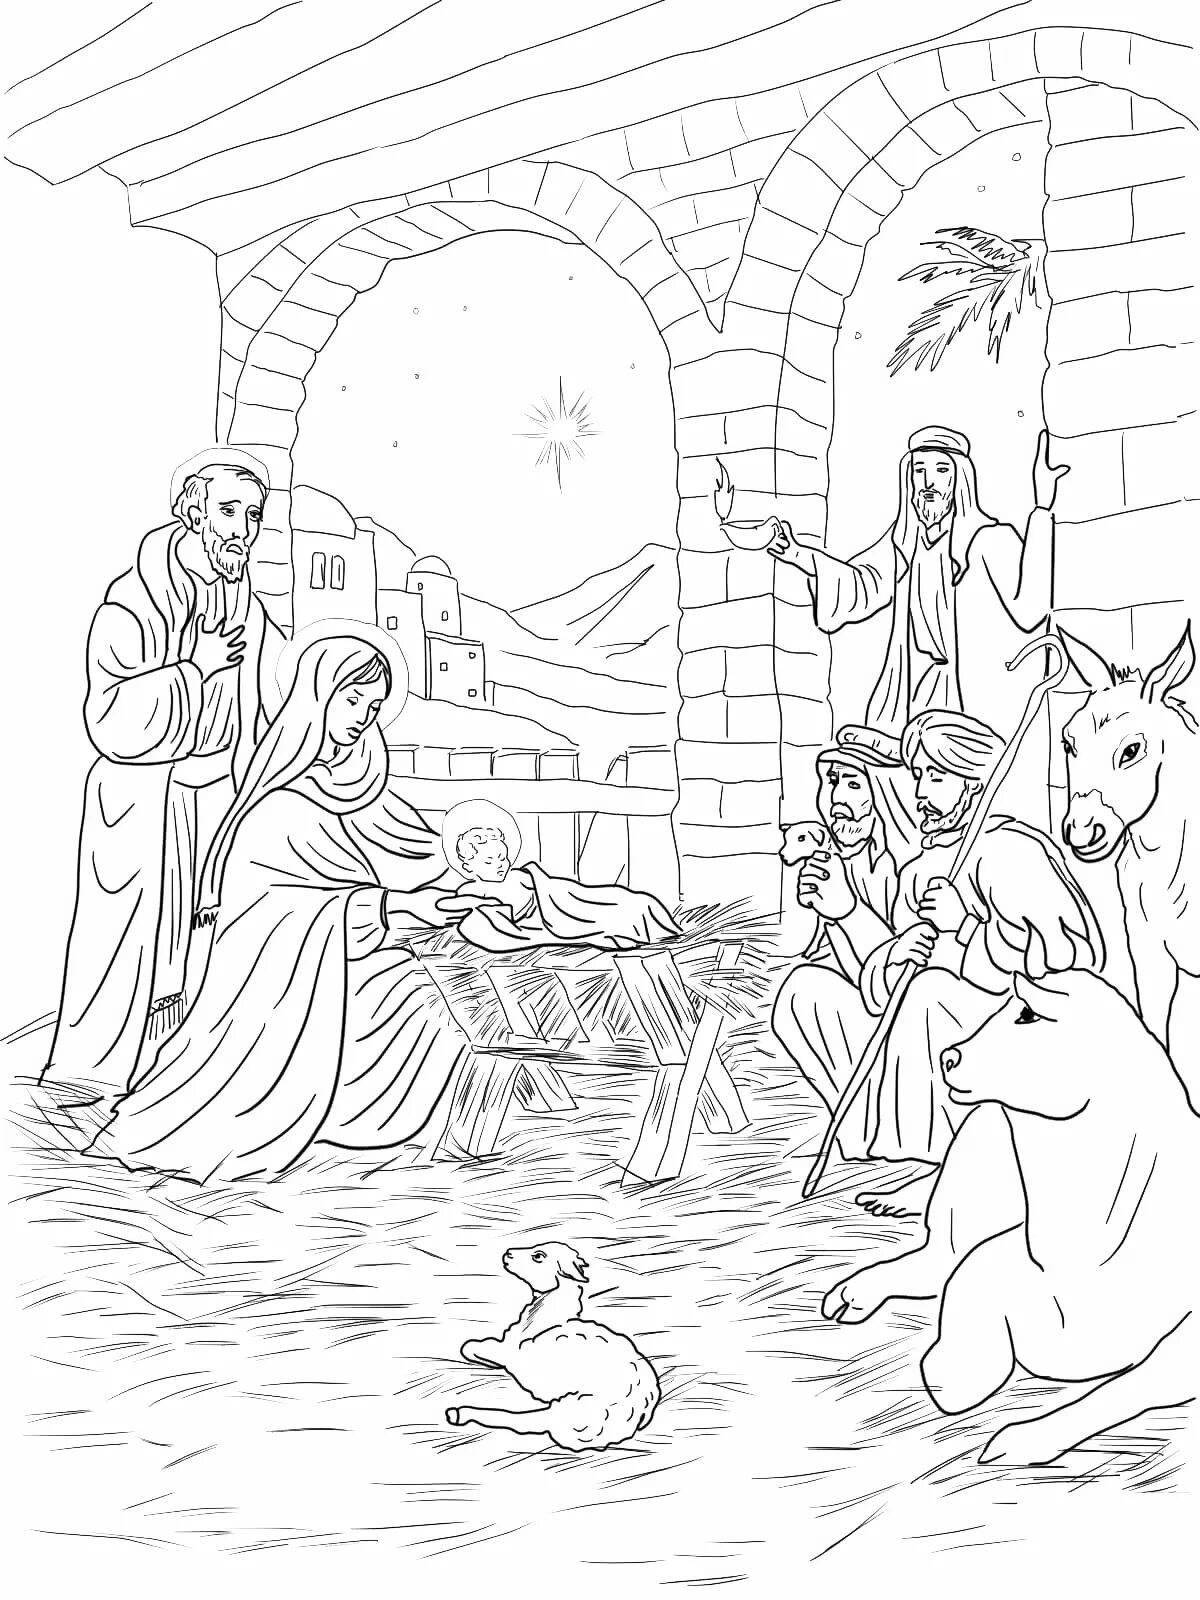 Coloring page grandiose jesus in the manger